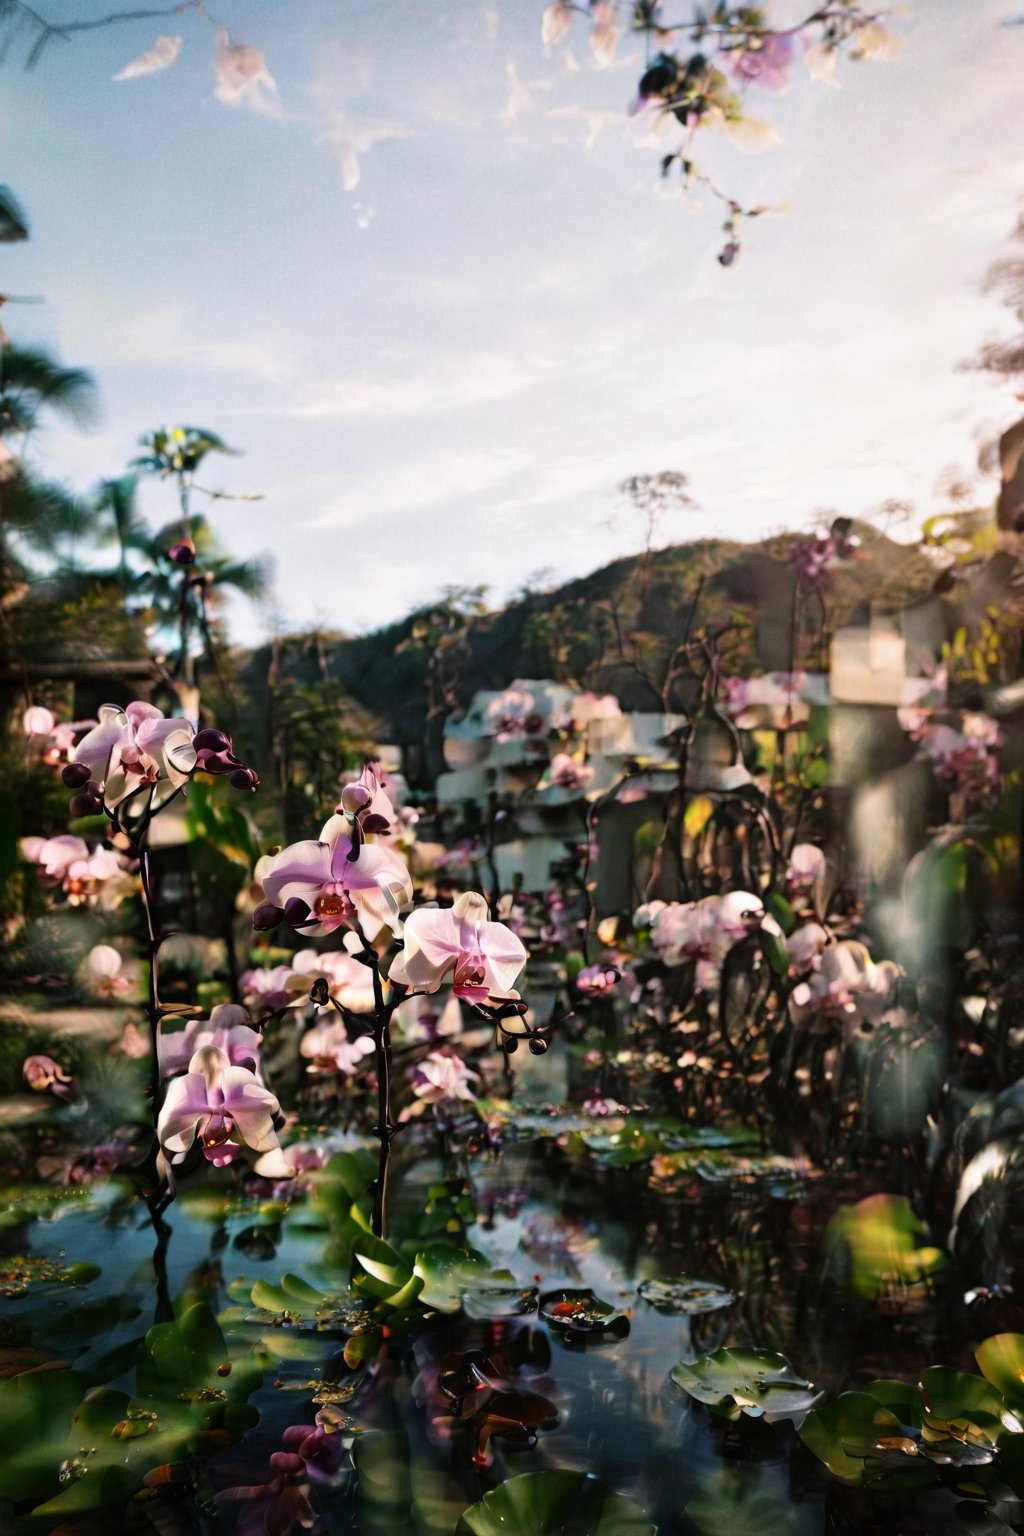 nature background, landscape, distortion, blur, meme, dreamcore, desaturation , brightness, chromatic distortion,analog photography, camera lens distortion, fantastic, daydream, liminal spaces, dreams, realistic nature, analog record, orchids, tropical, cursed